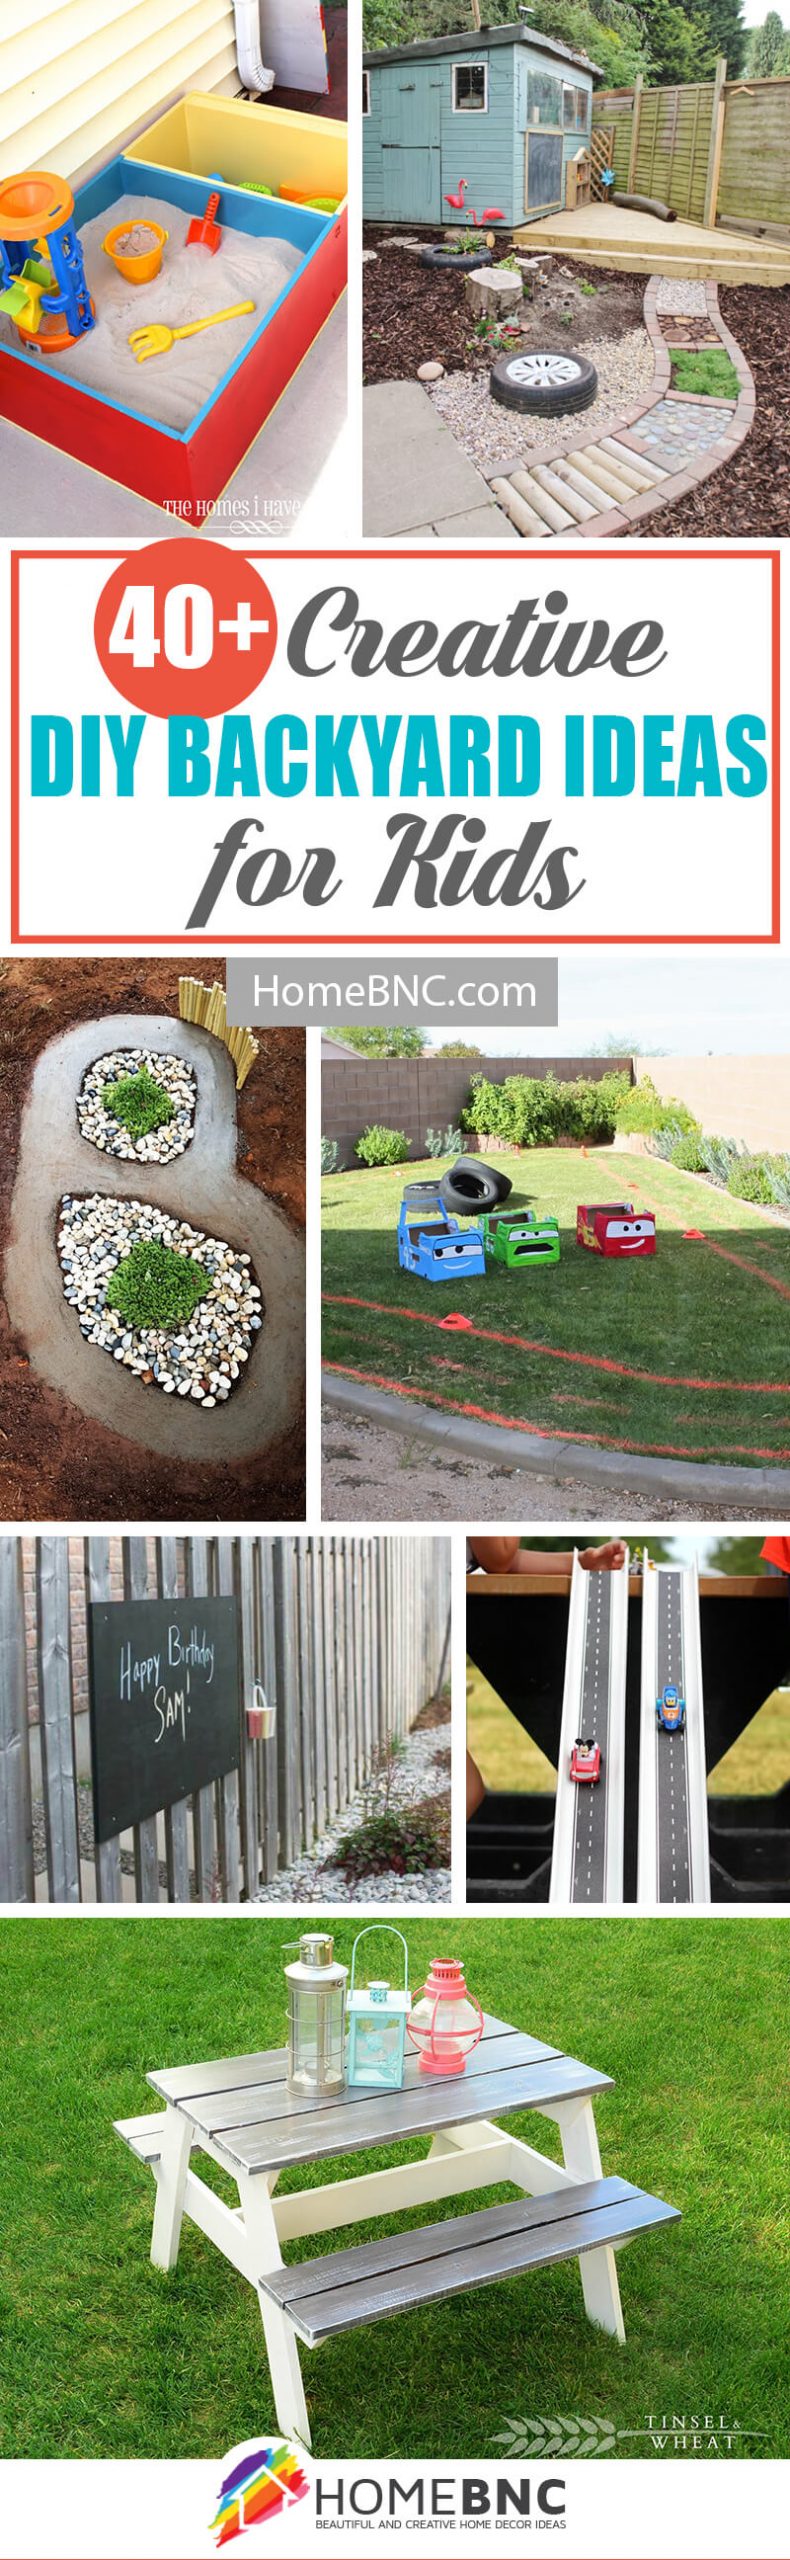 20+ Best DIY Backyard Ideas and Designs for Kids in 20